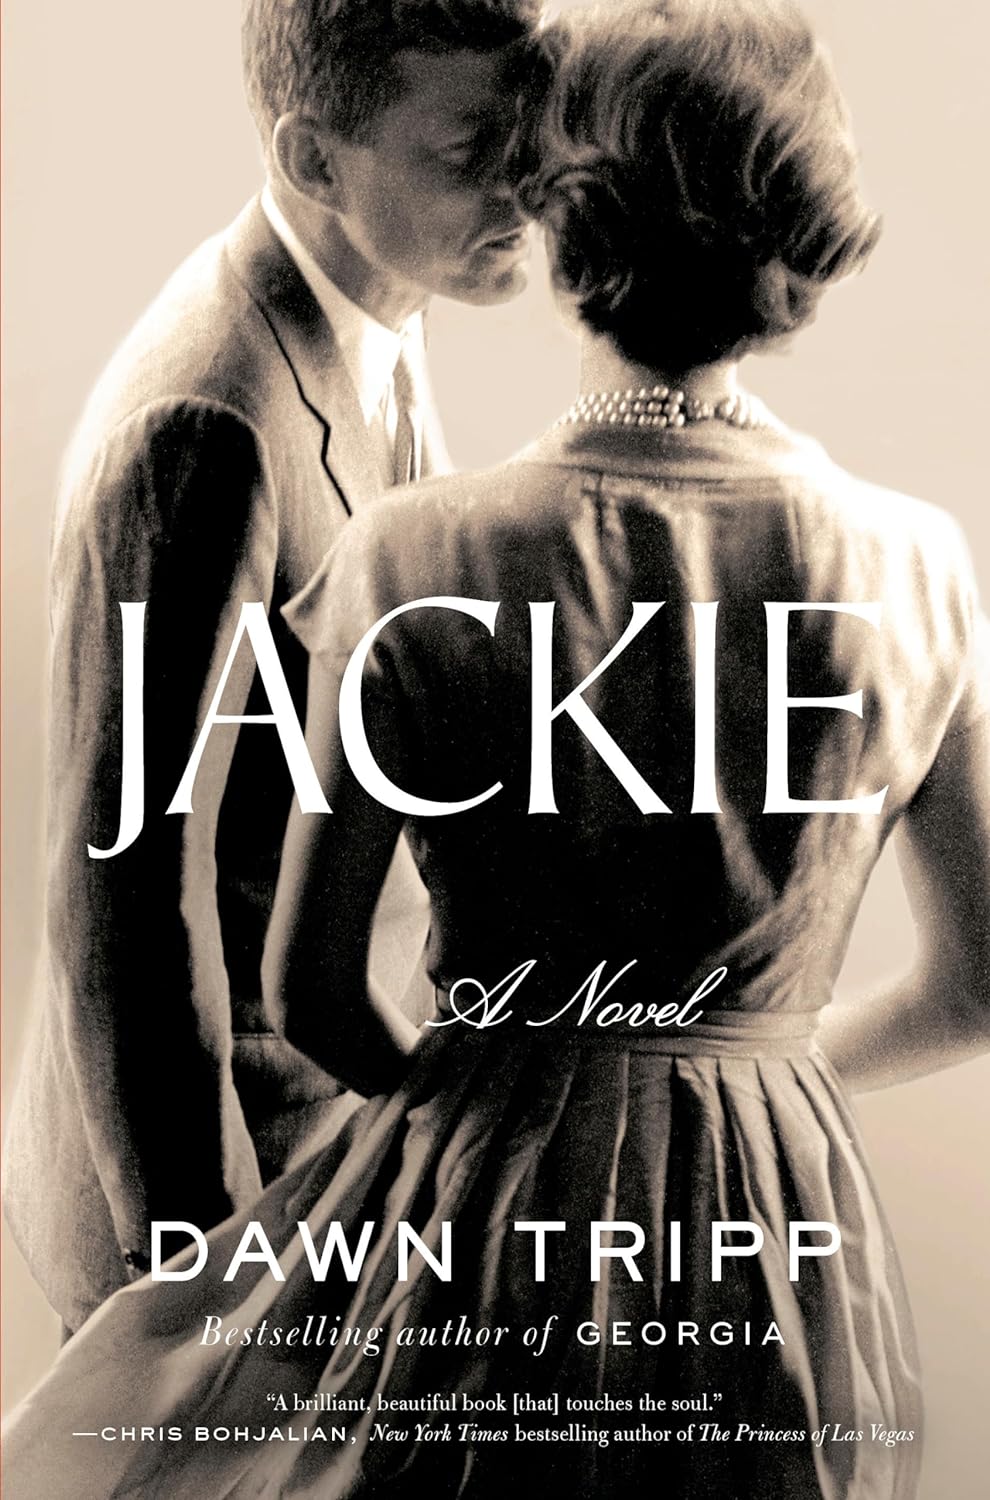 Image for "Jackie"